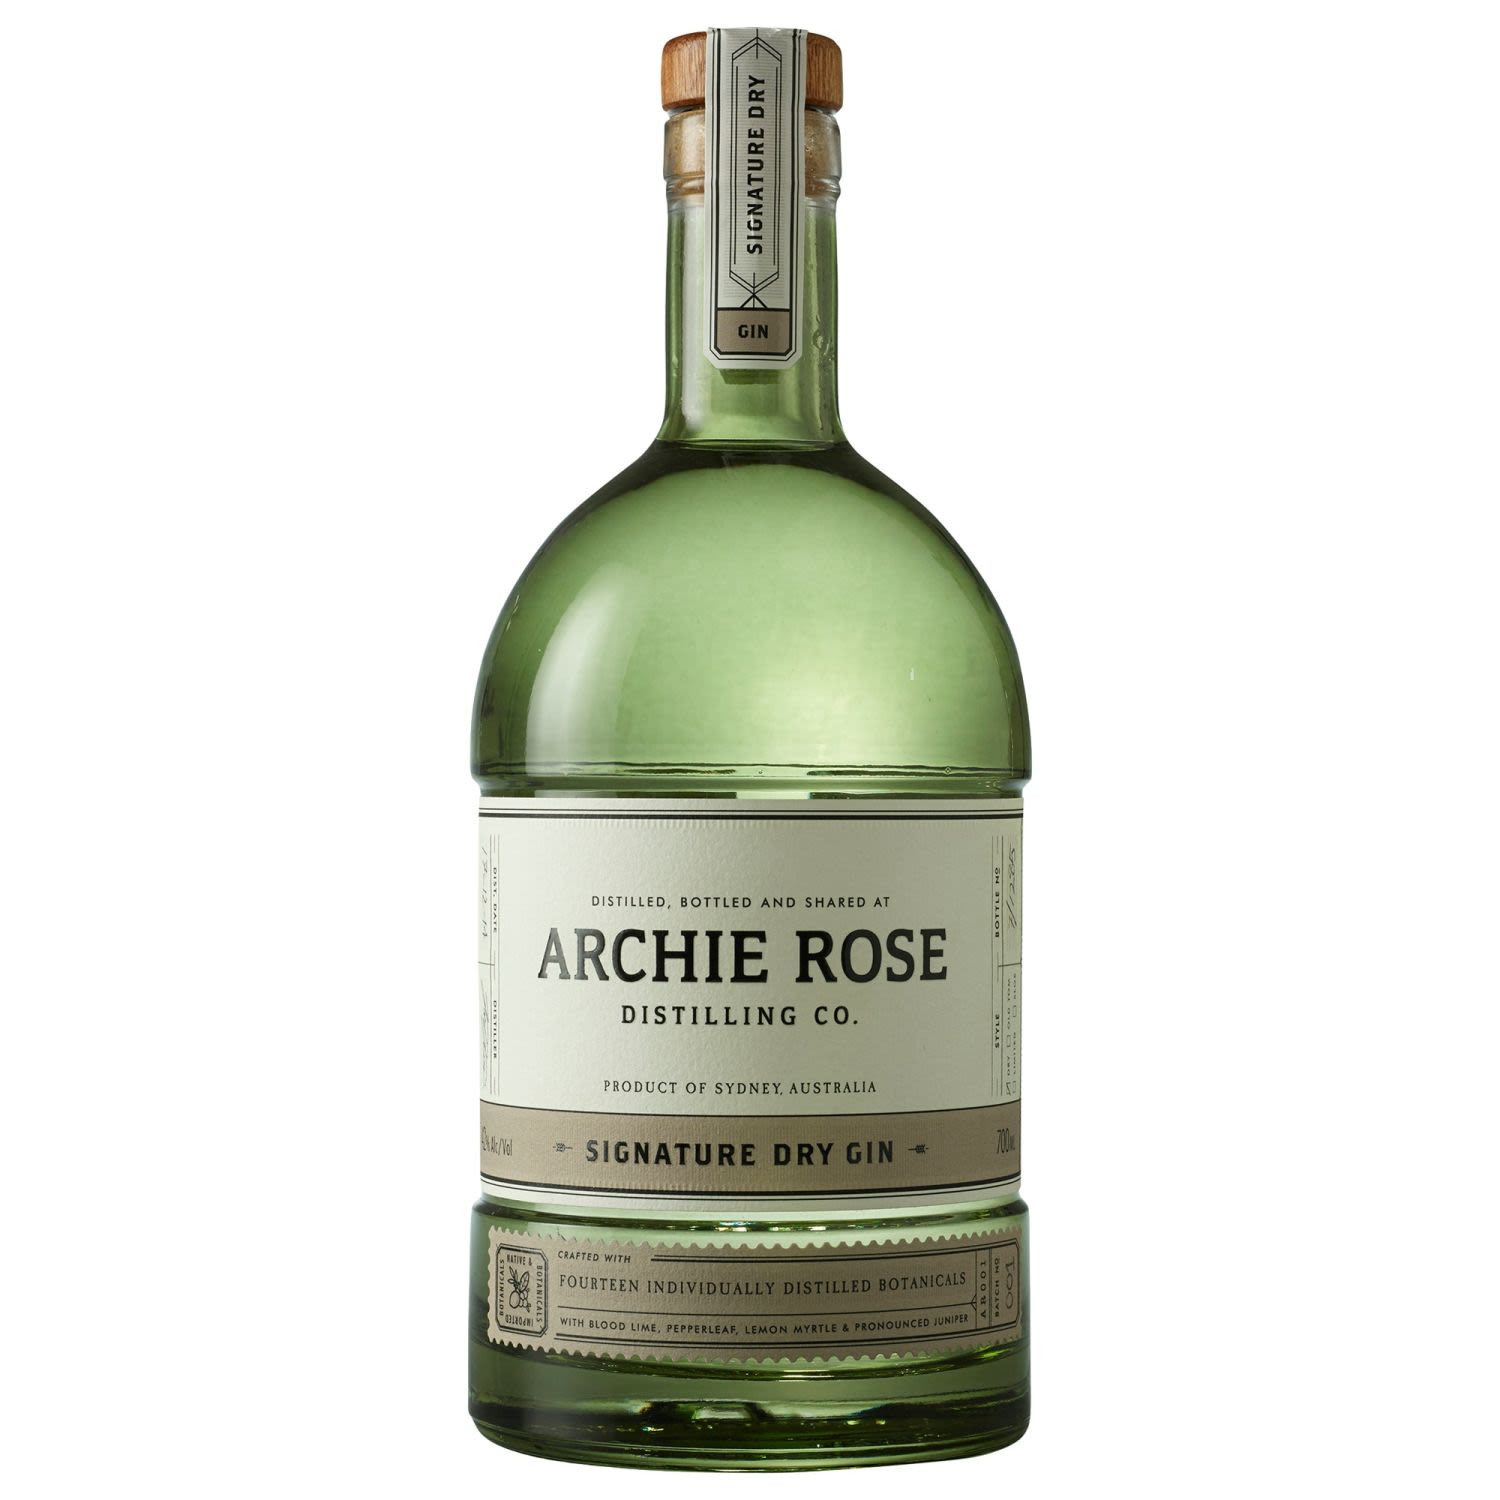 Launched in March 2015, Archie Rose Distilling Co. is the first independent distillery and bar to open in the City of Sydney in over 160 years. Featuring Australian native botanicals including Lemon Myrtle, Blood Lime, River Mint and Dorrigo Pepperleaf, Archie Rose Signature Dry Gin is unique in the fact that all fourteen botanicals are individually distilled utilising one of three separate infusion points within a 300L copper pot still. While particularly labour intensive, the result is a perfectly balanced and wonderfully complex dry gin that fuses the old world with the new.<br /> <br />Alcohol Volume: 42.00%<br /><br />Pack Format: Bottle<br /><br />Standard Drinks: 23.2</br /><br />Pack Type: Bottle<br /><br />Country of Origin: Australia<br />